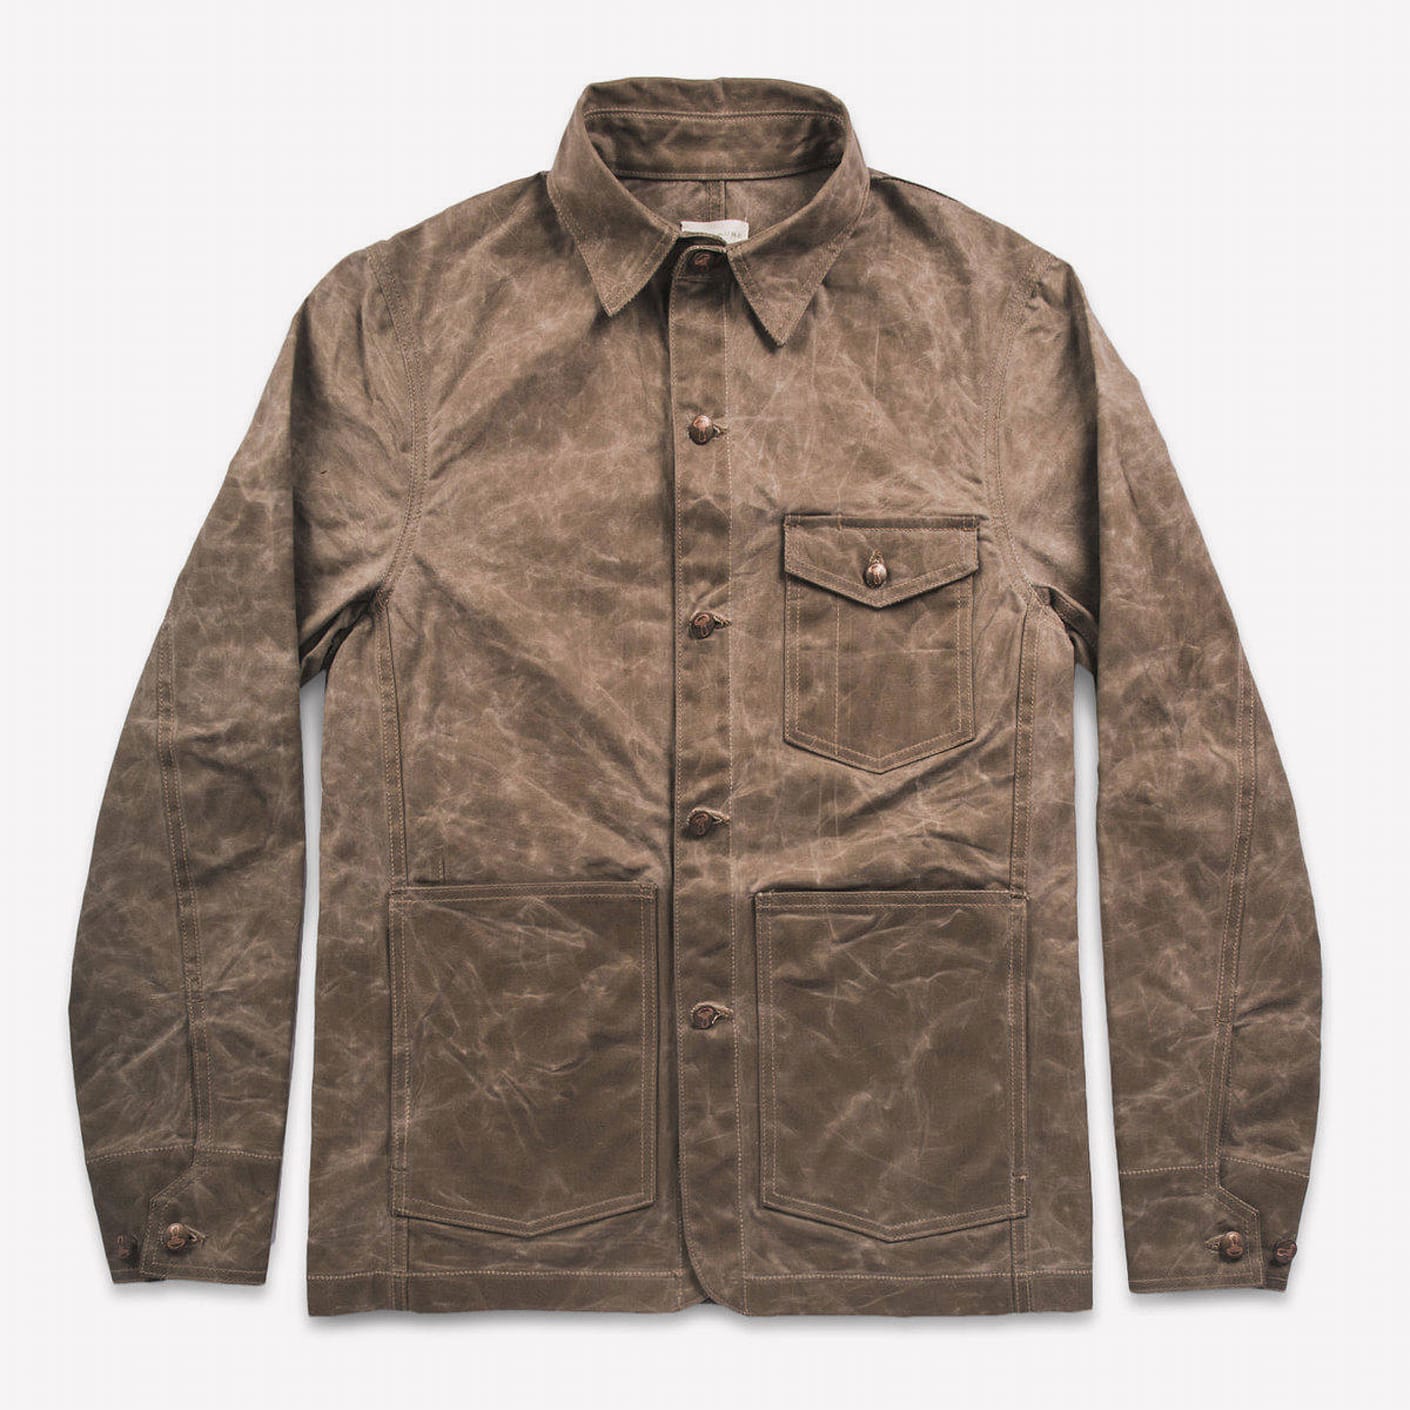 Taylor Stitch The Project Waxed Canvas Jacket – Tan | Bespoke Post